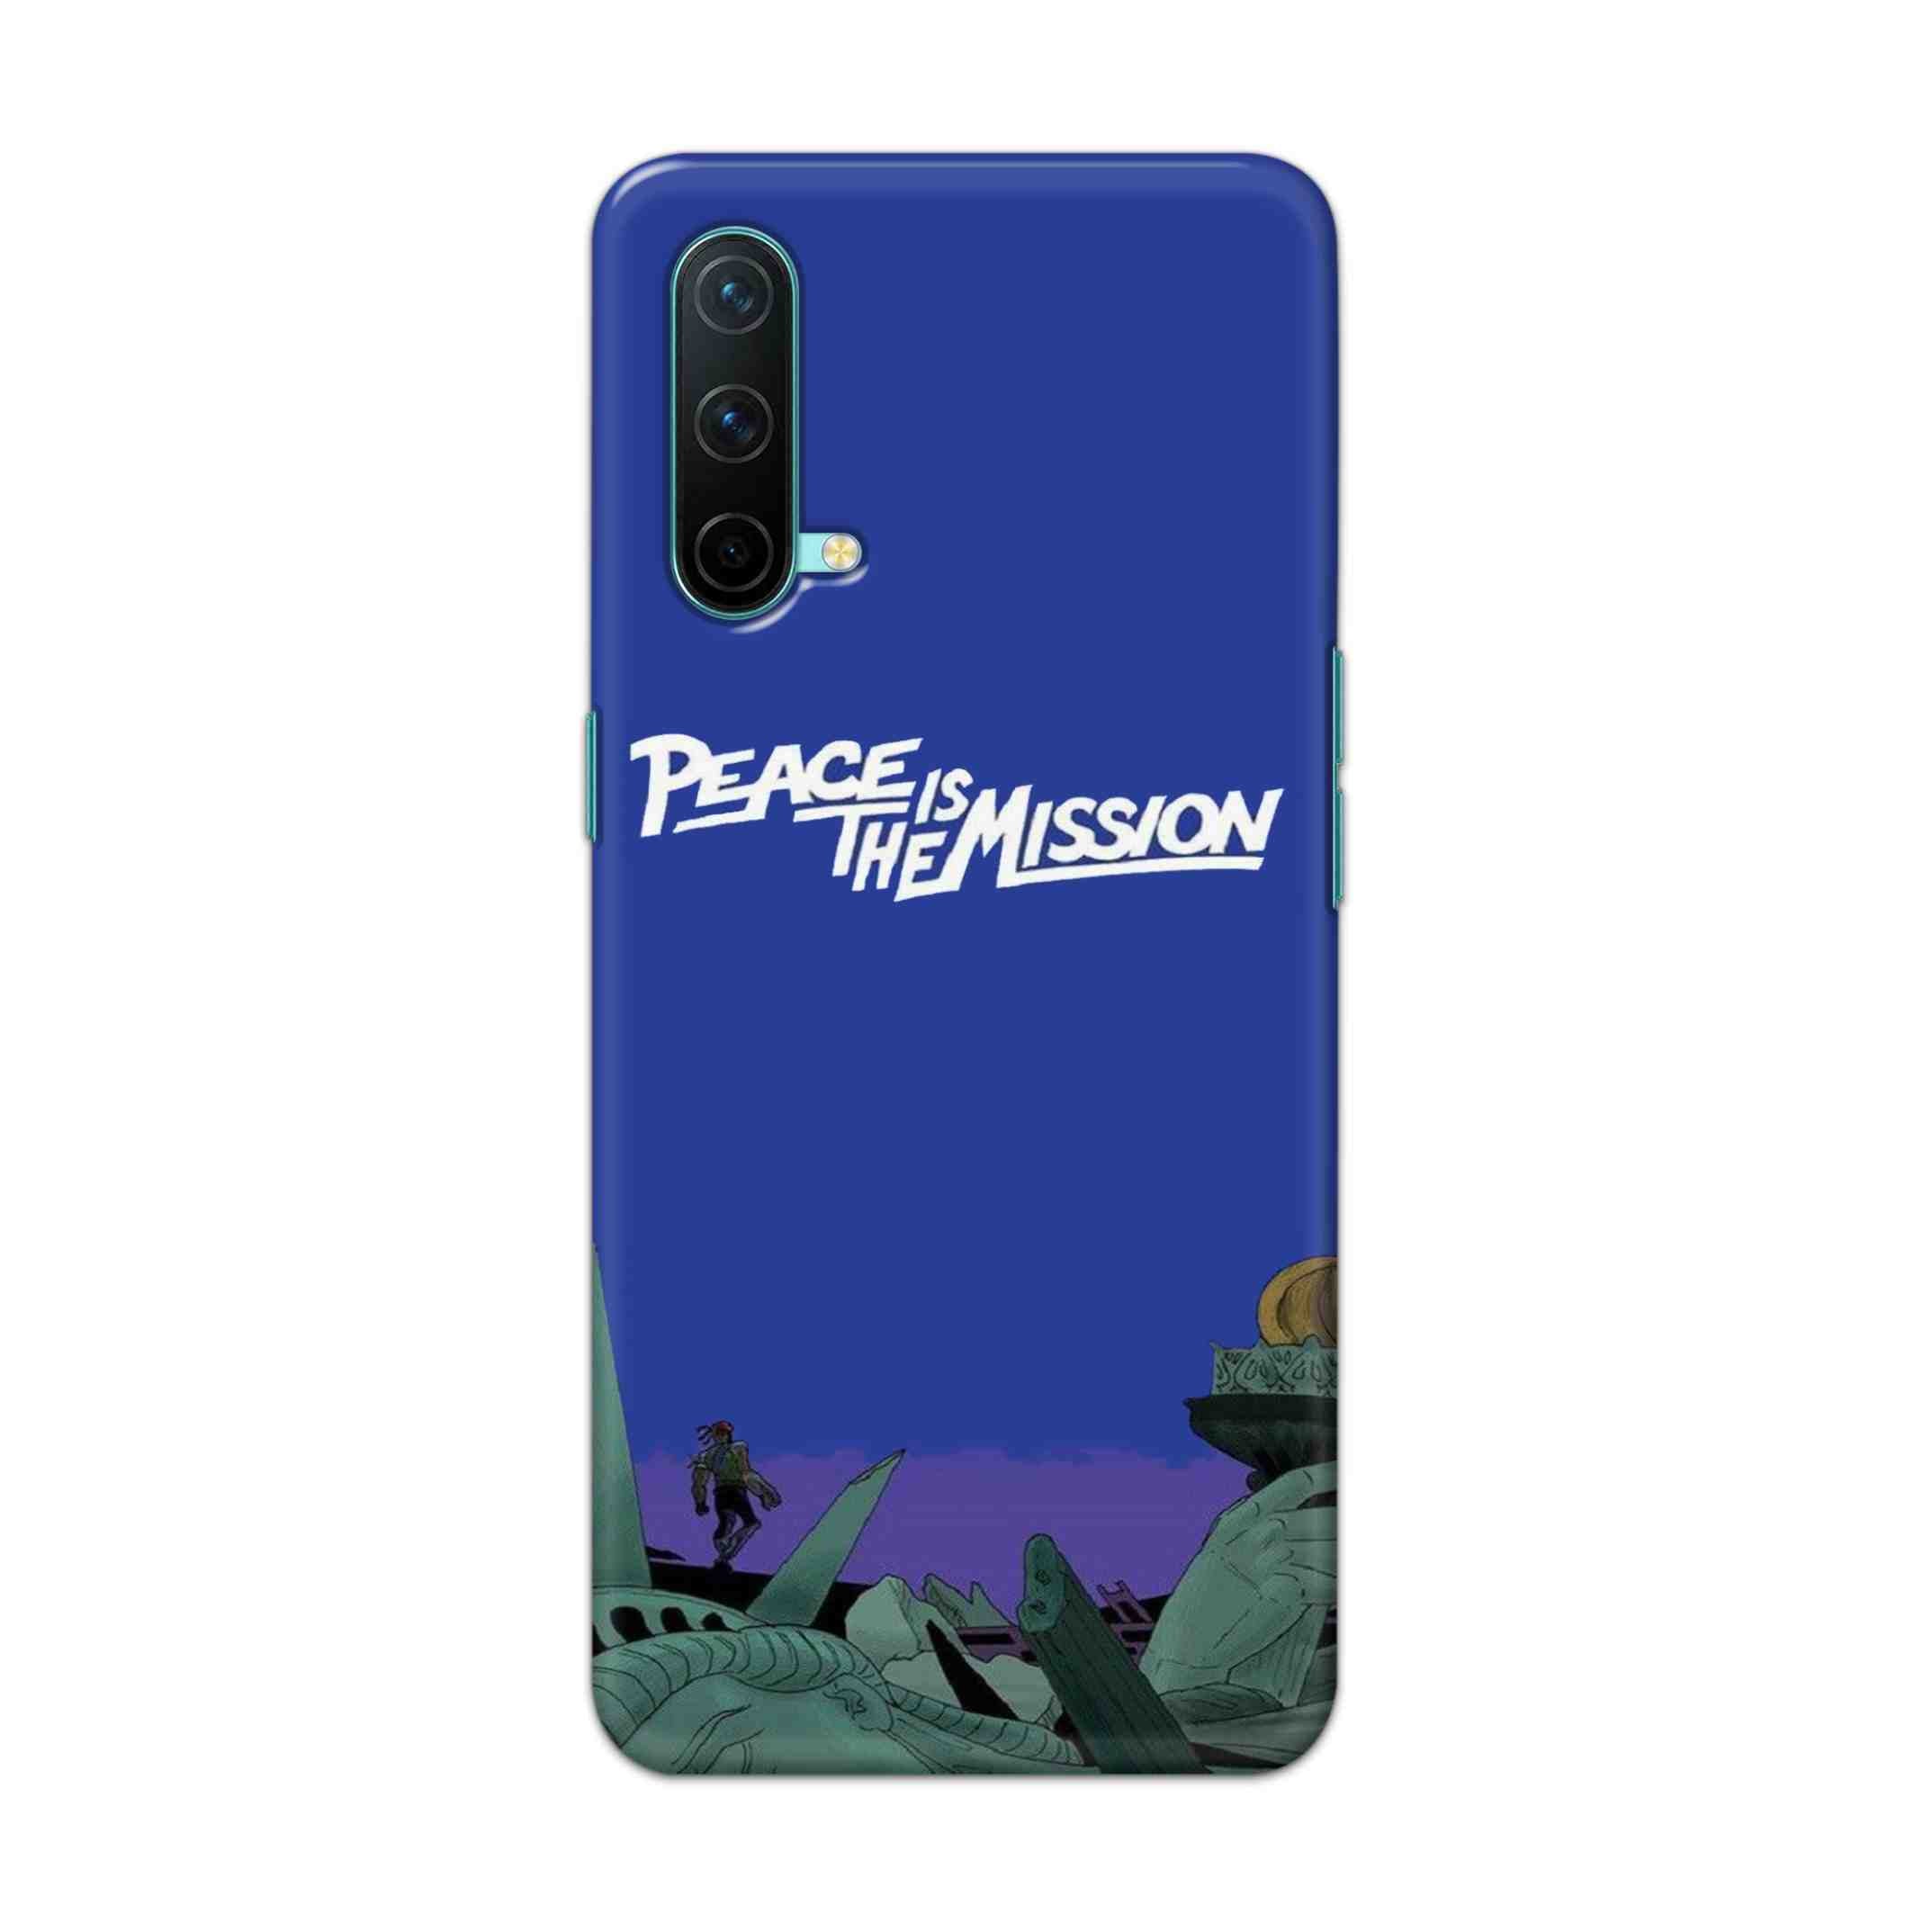 Buy Peace Is The Misson Hard Back Mobile Phone Case Cover For OnePlus Nord CE Online